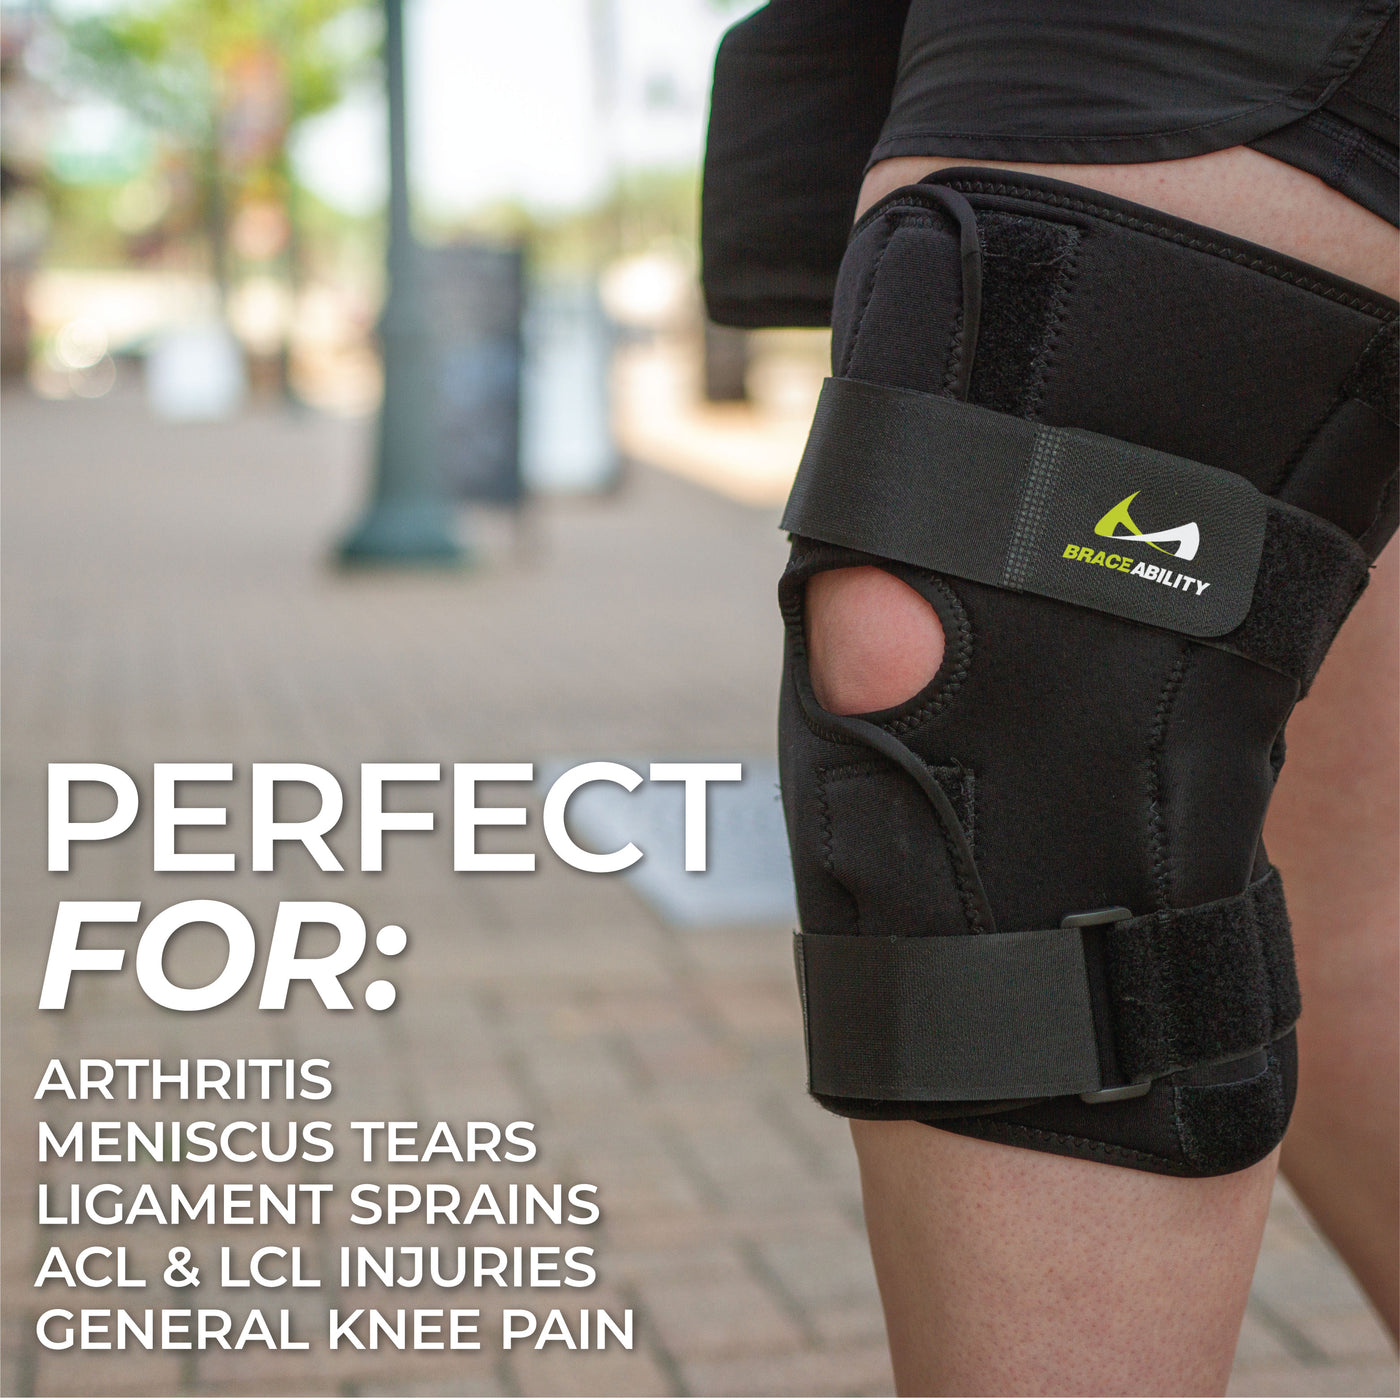 Our bariatric knee support is the best knee brace for meniscus tears